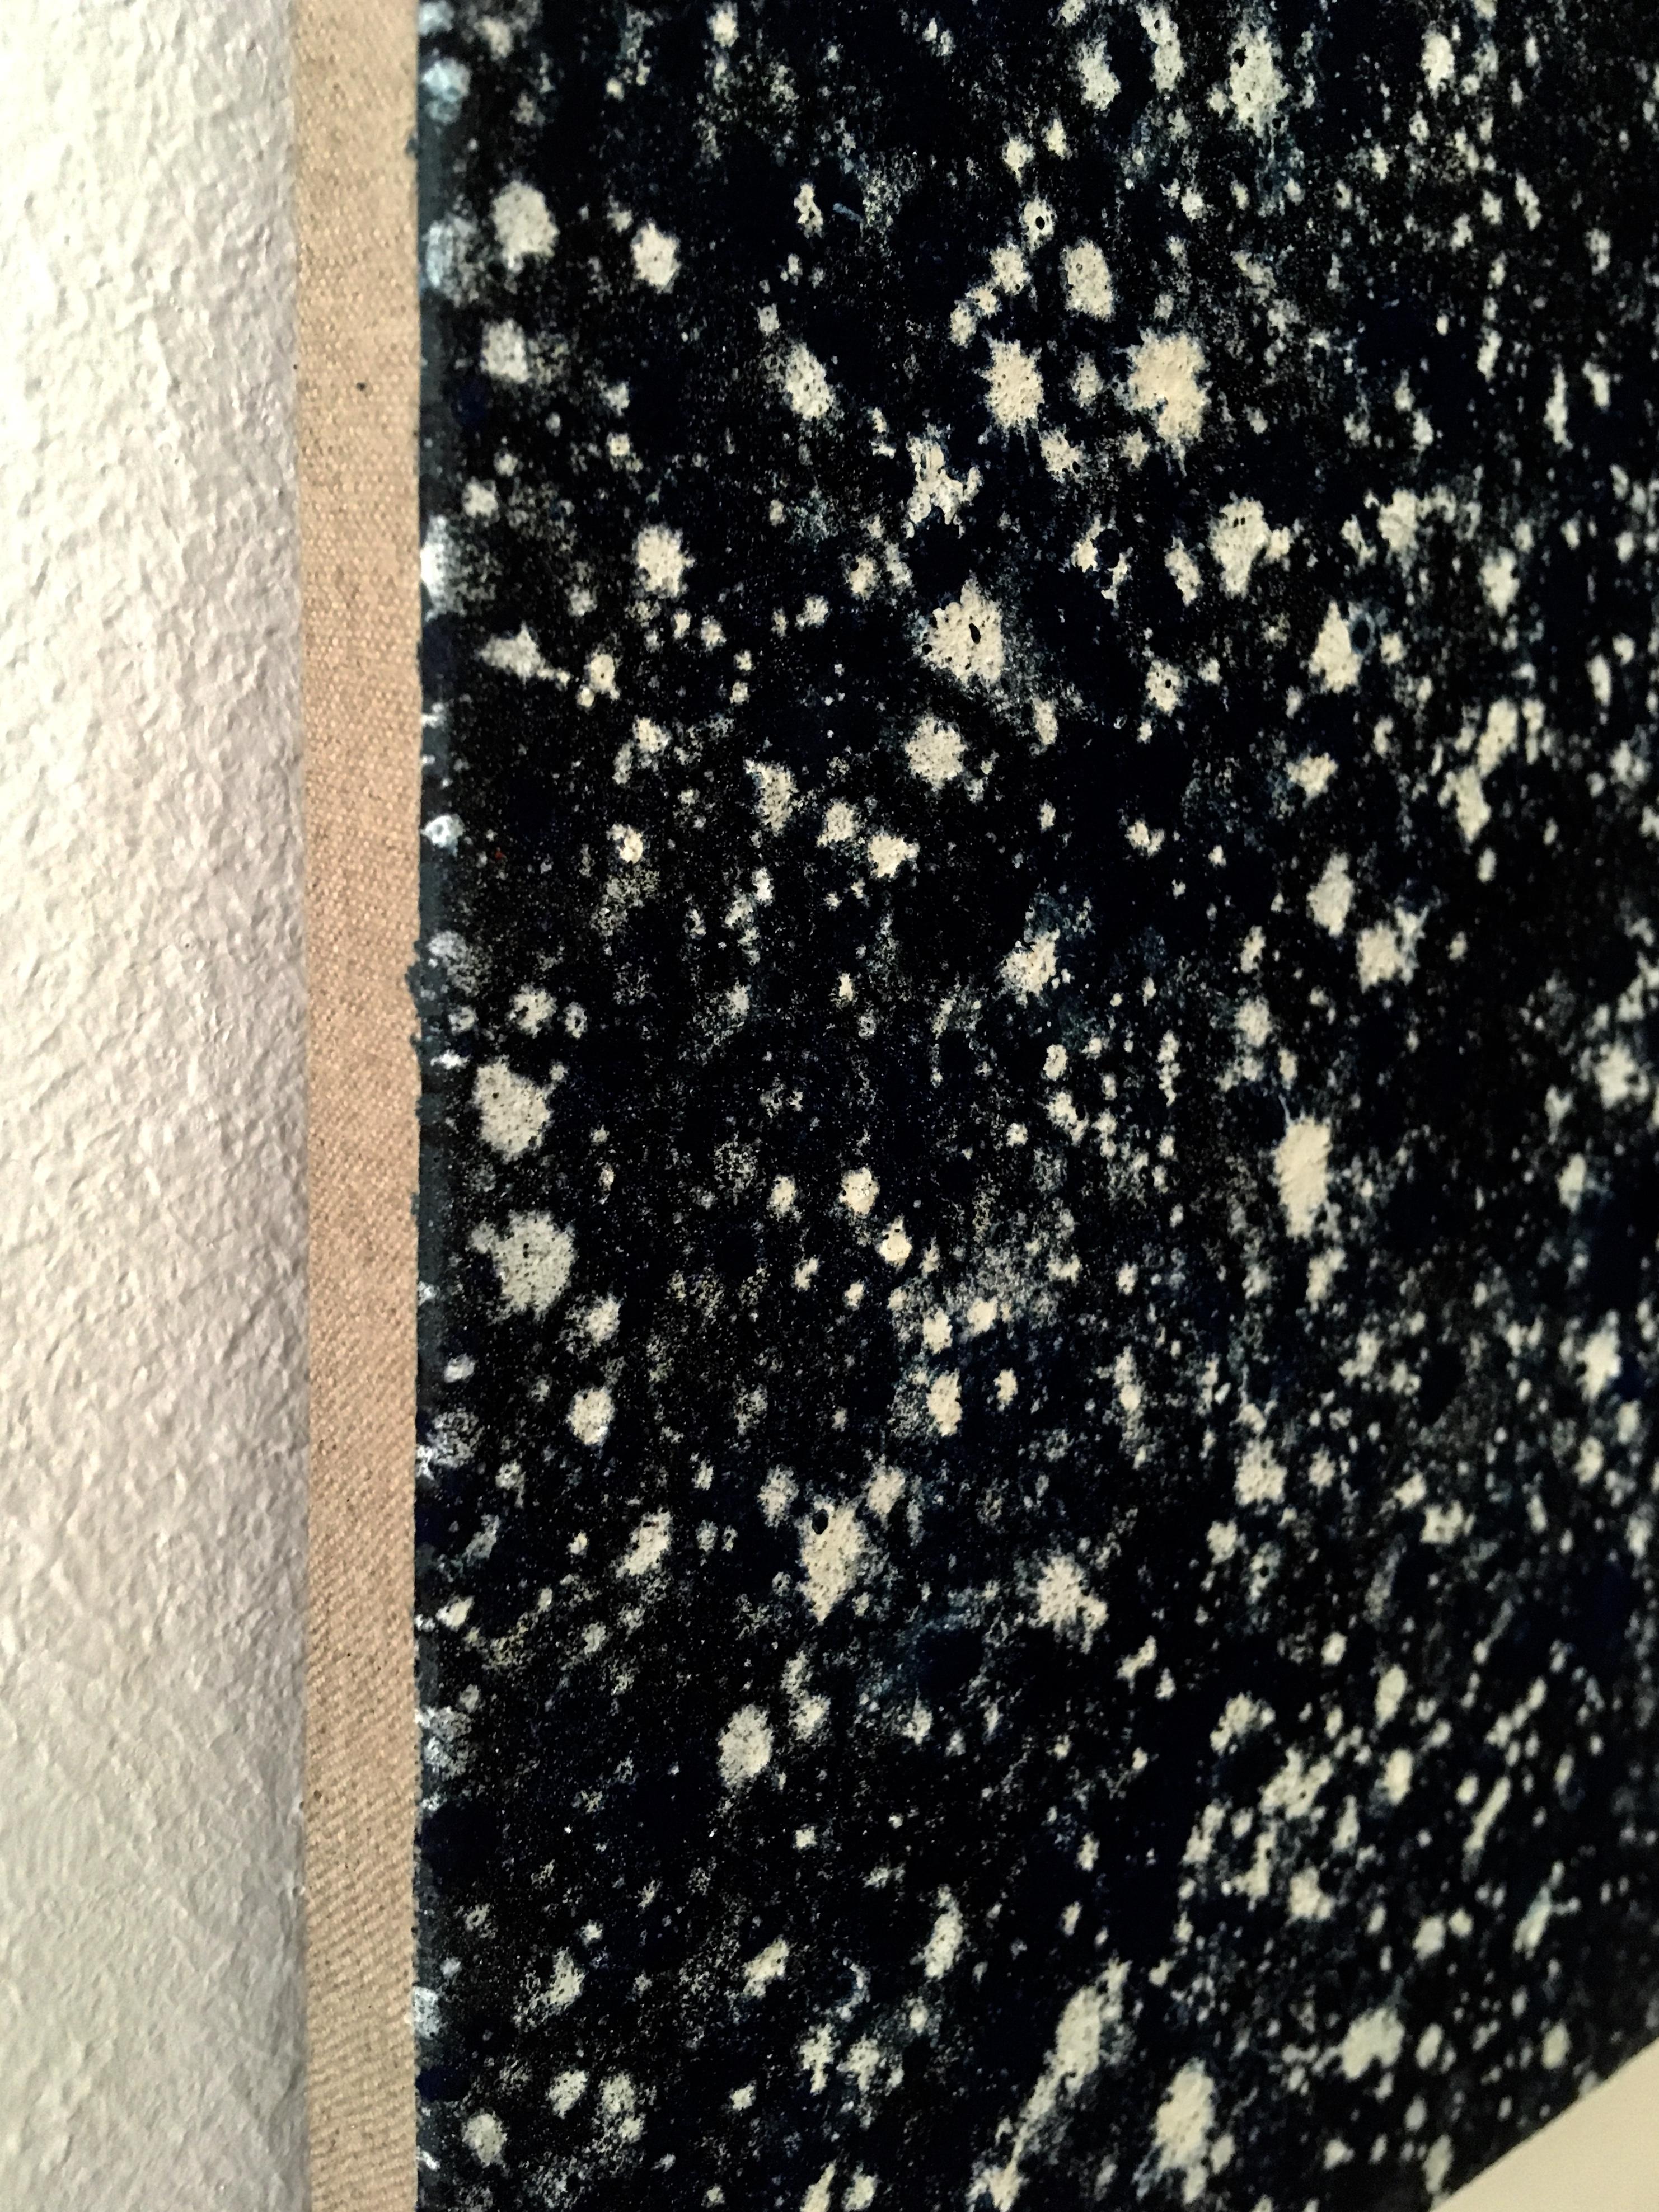 Snow Falling at Twilight - Tombe Du Ciel I & II / Diptych - Oil on Linen - Black Landscape Painting by Frédéric Choisel